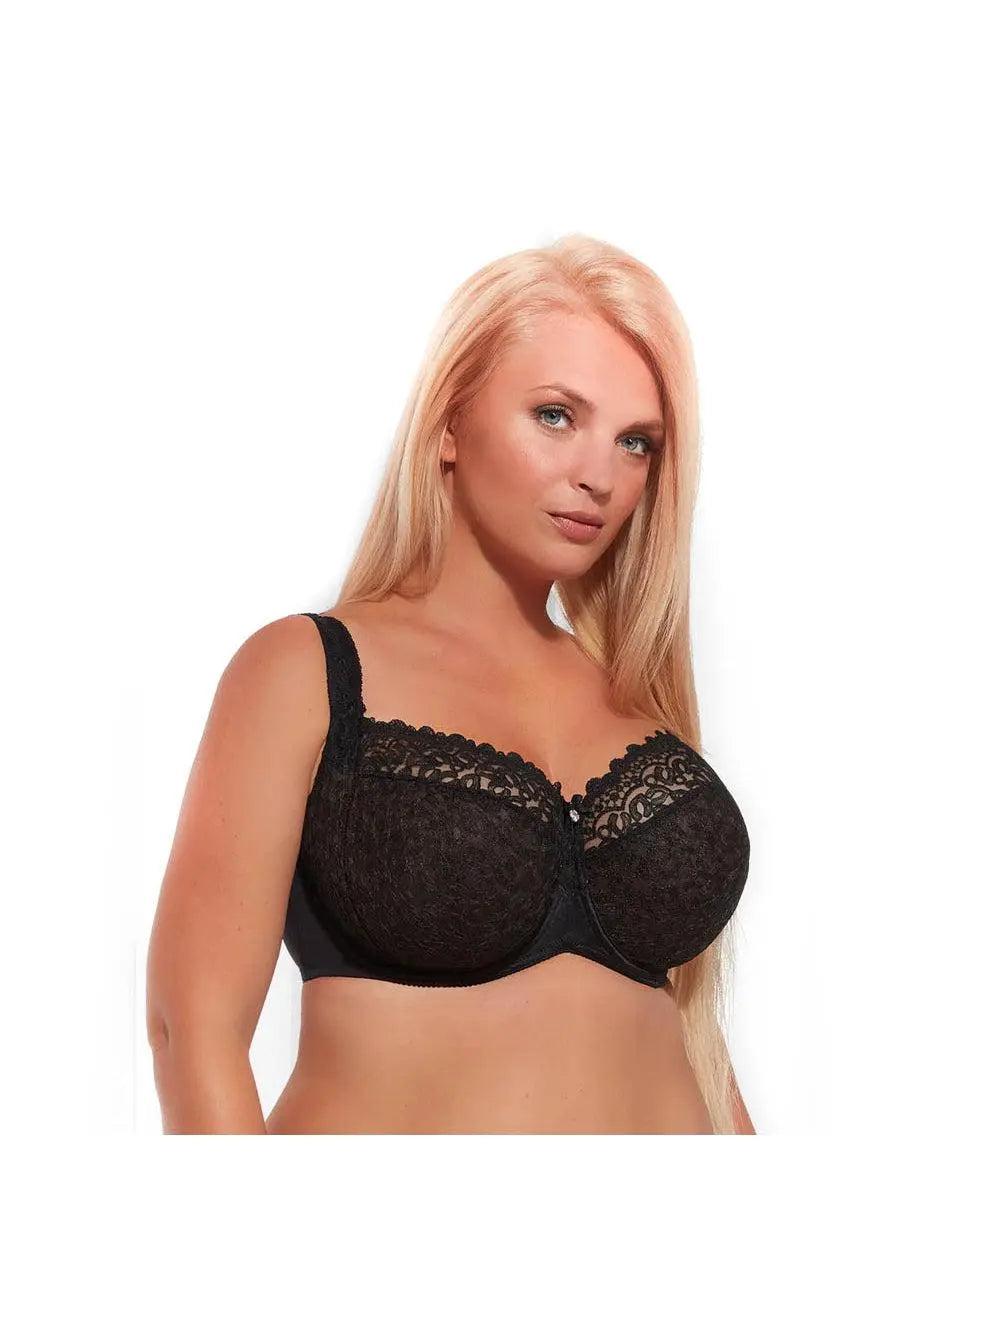 50C Bras  Buy Size 50C Bras at Betty and Belle Lingerie